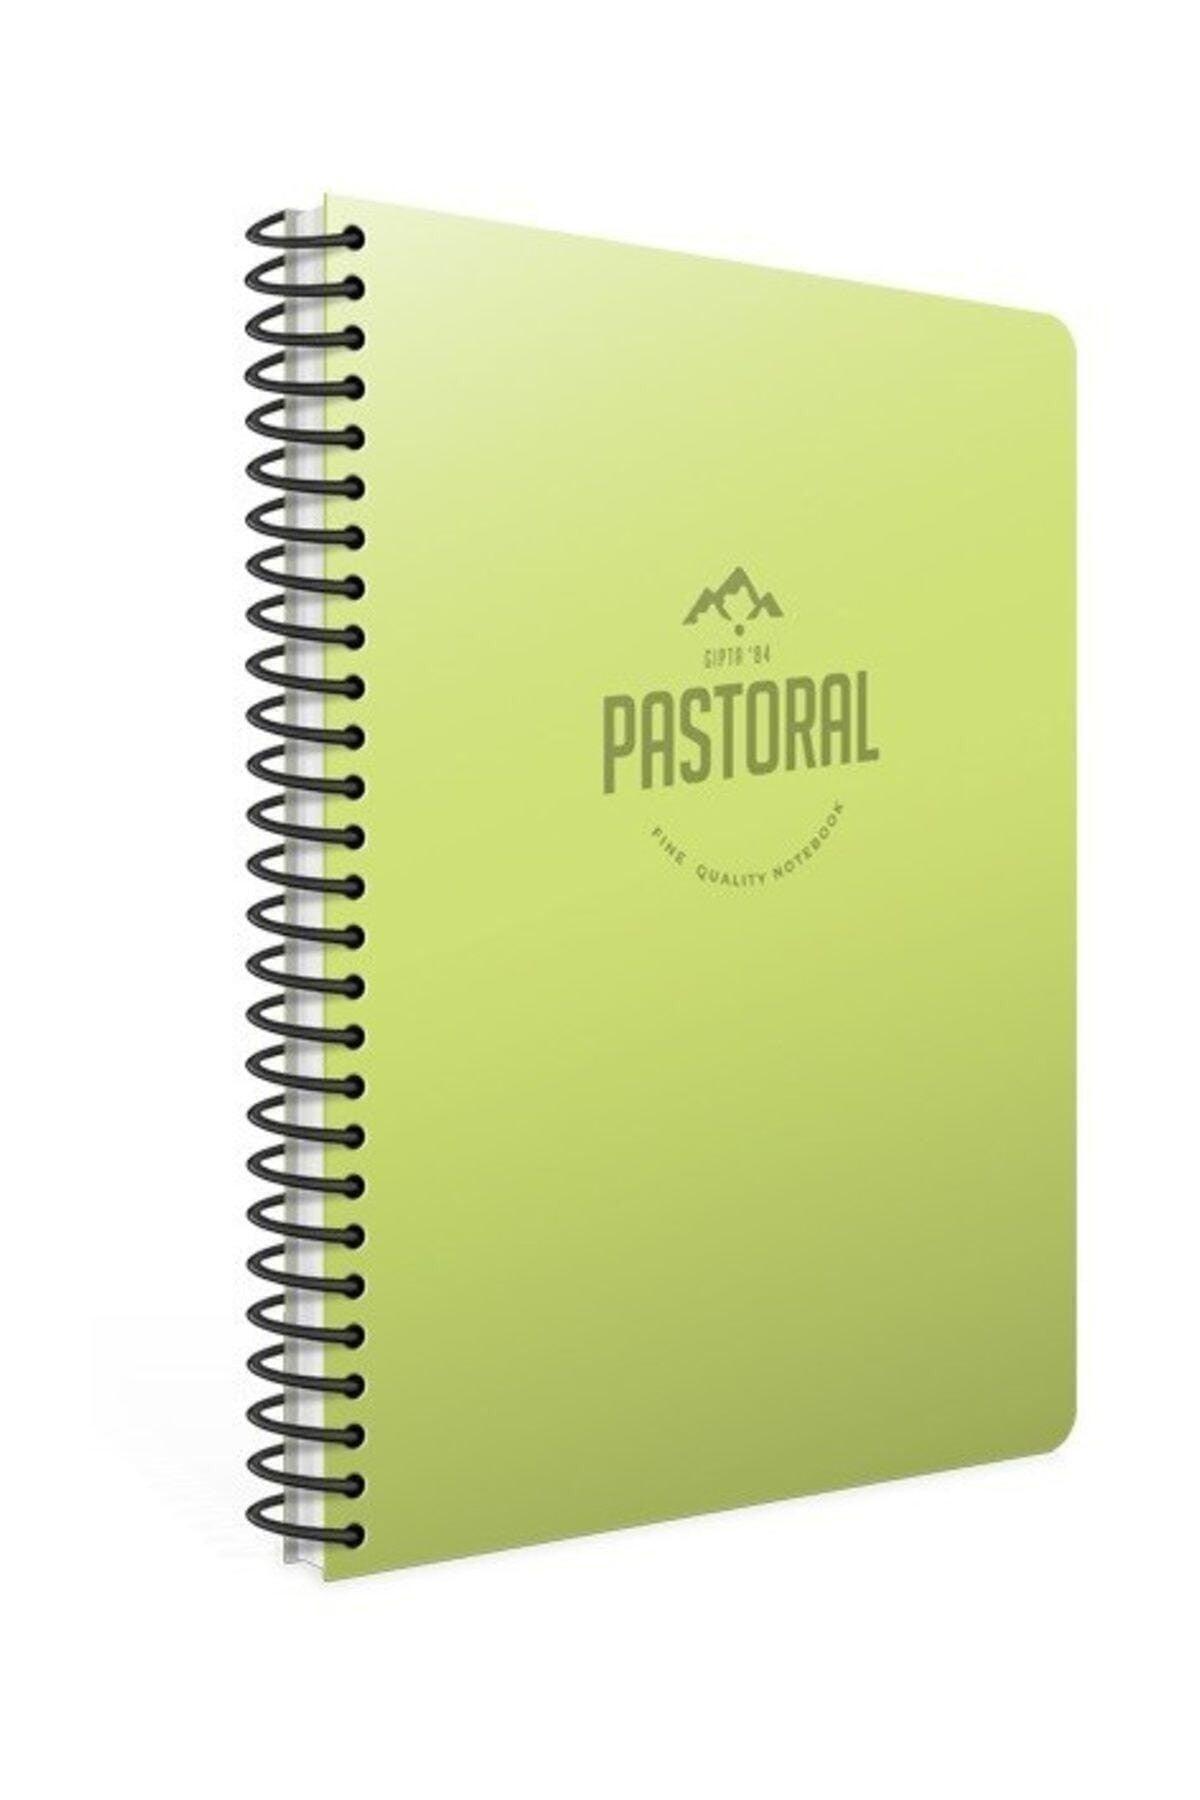 Pastoral A4 72 Sheets Unlined Spiral Notebook